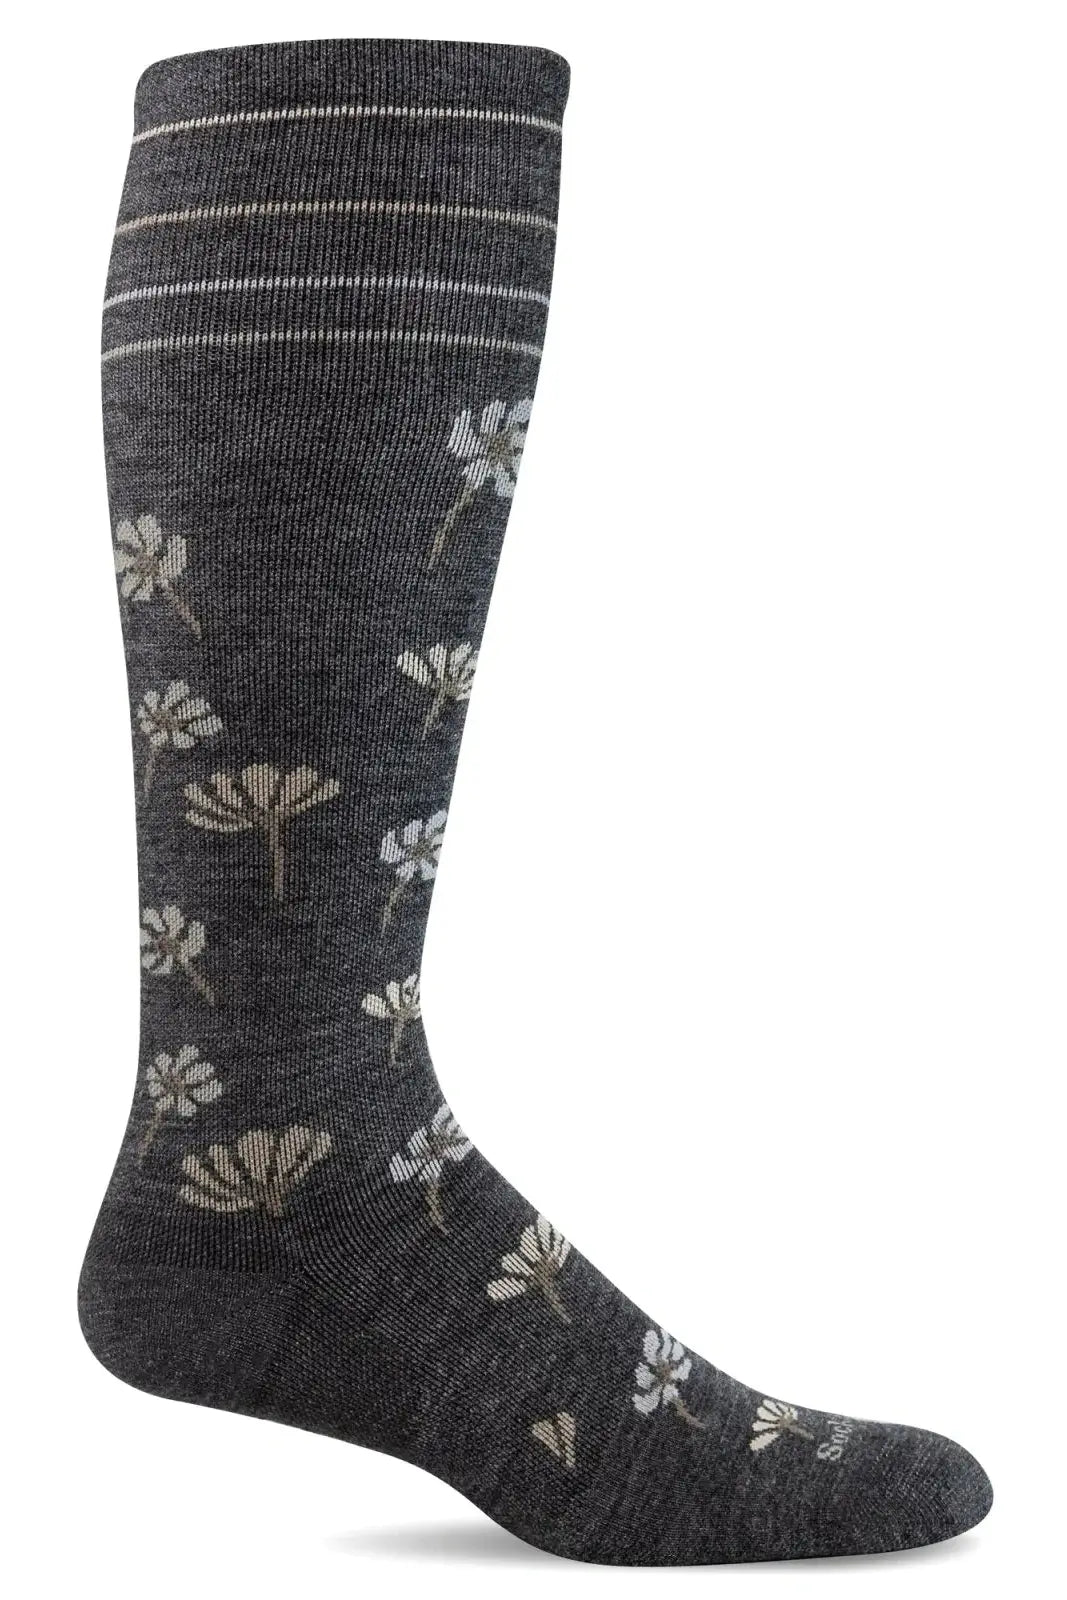 SOCKWELL Field Flower Compression